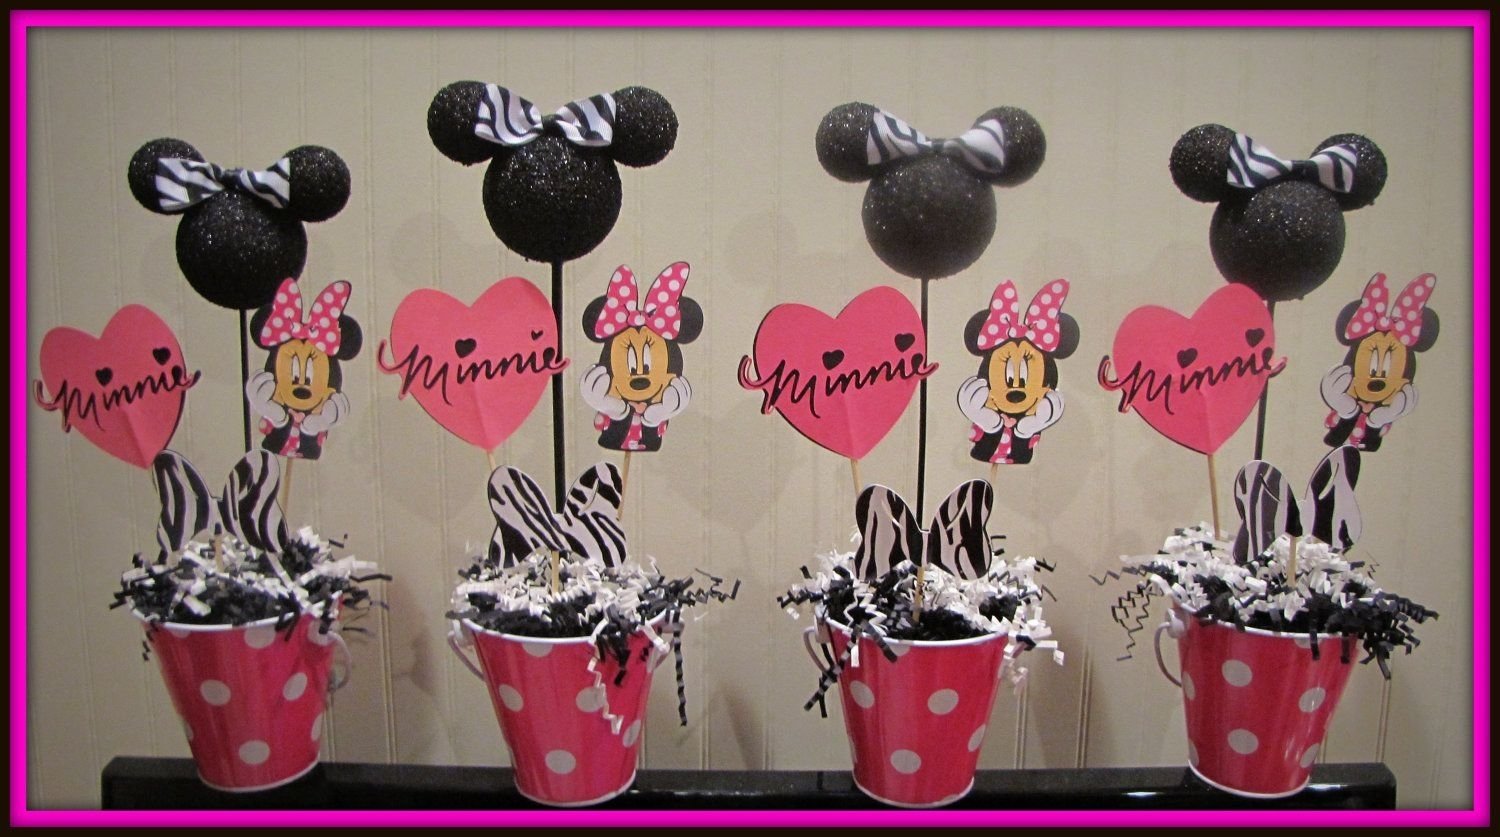 10 Spectacular Minnie Mouse Party Favors Ideas minnie mouse birthday theme minnie mouse birthday decorations 2022